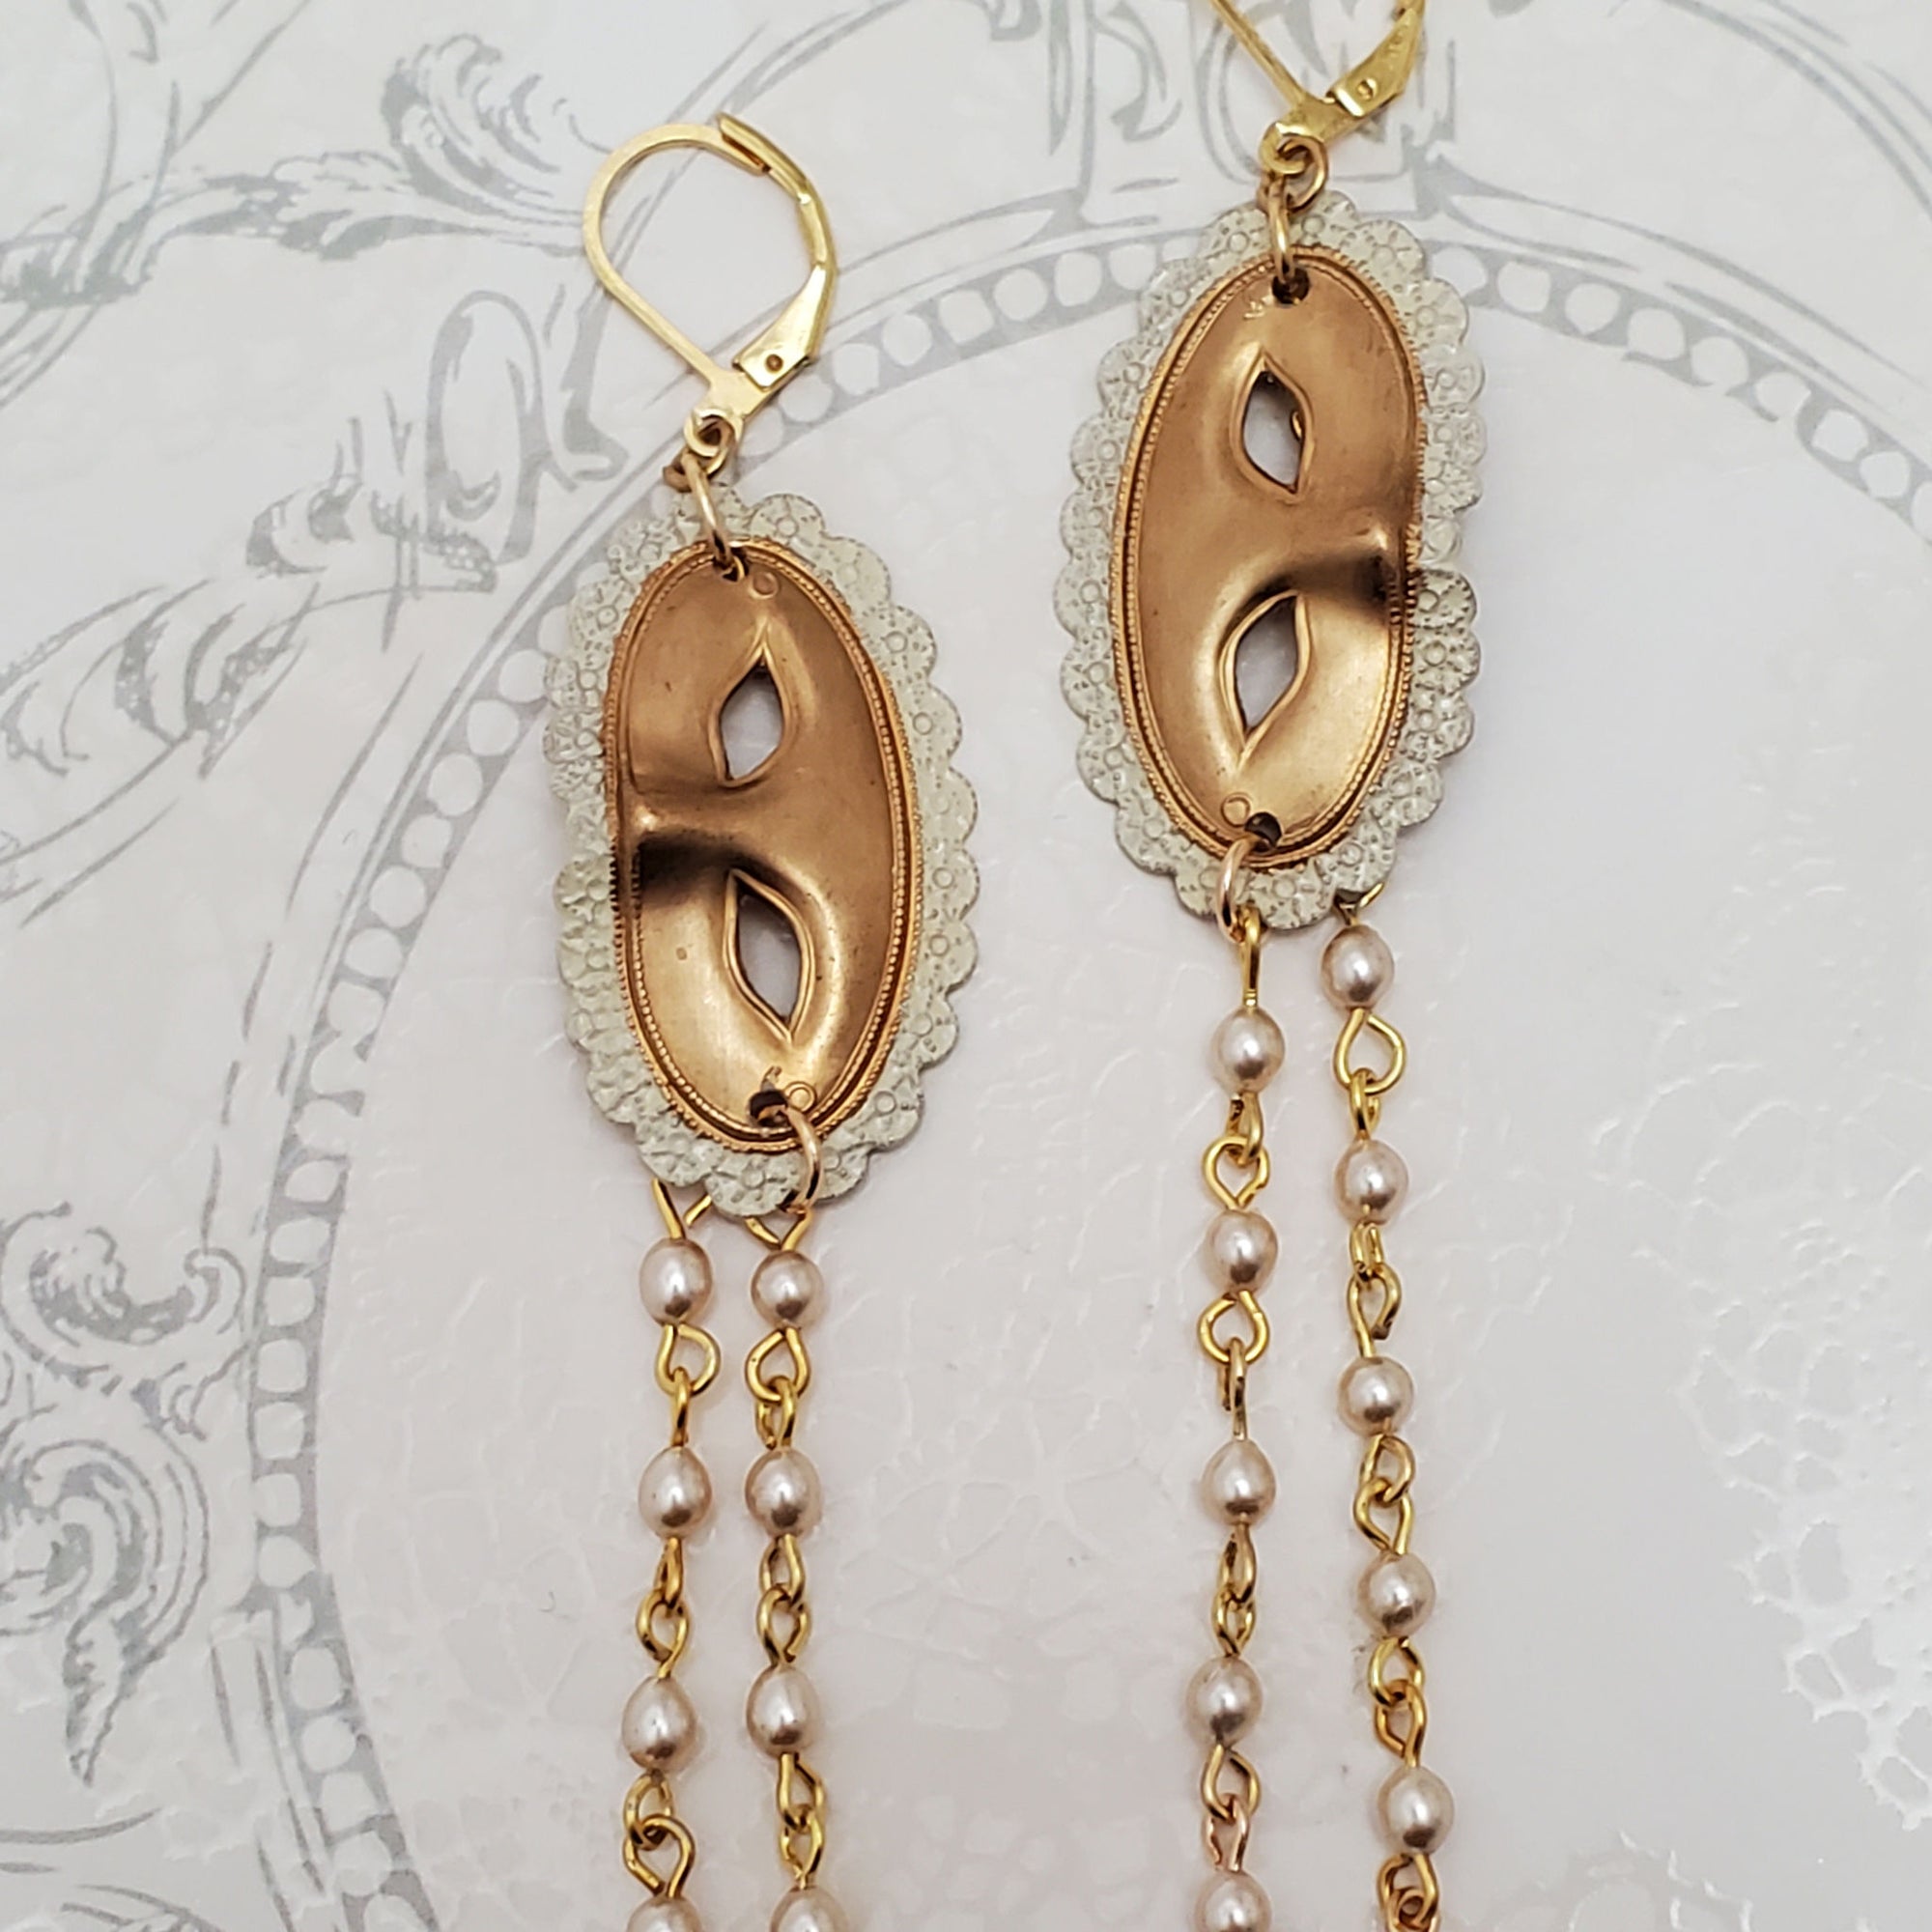 Hand painted brass Masquerade mask earrings with pearl chain drops and lever back earring hooks